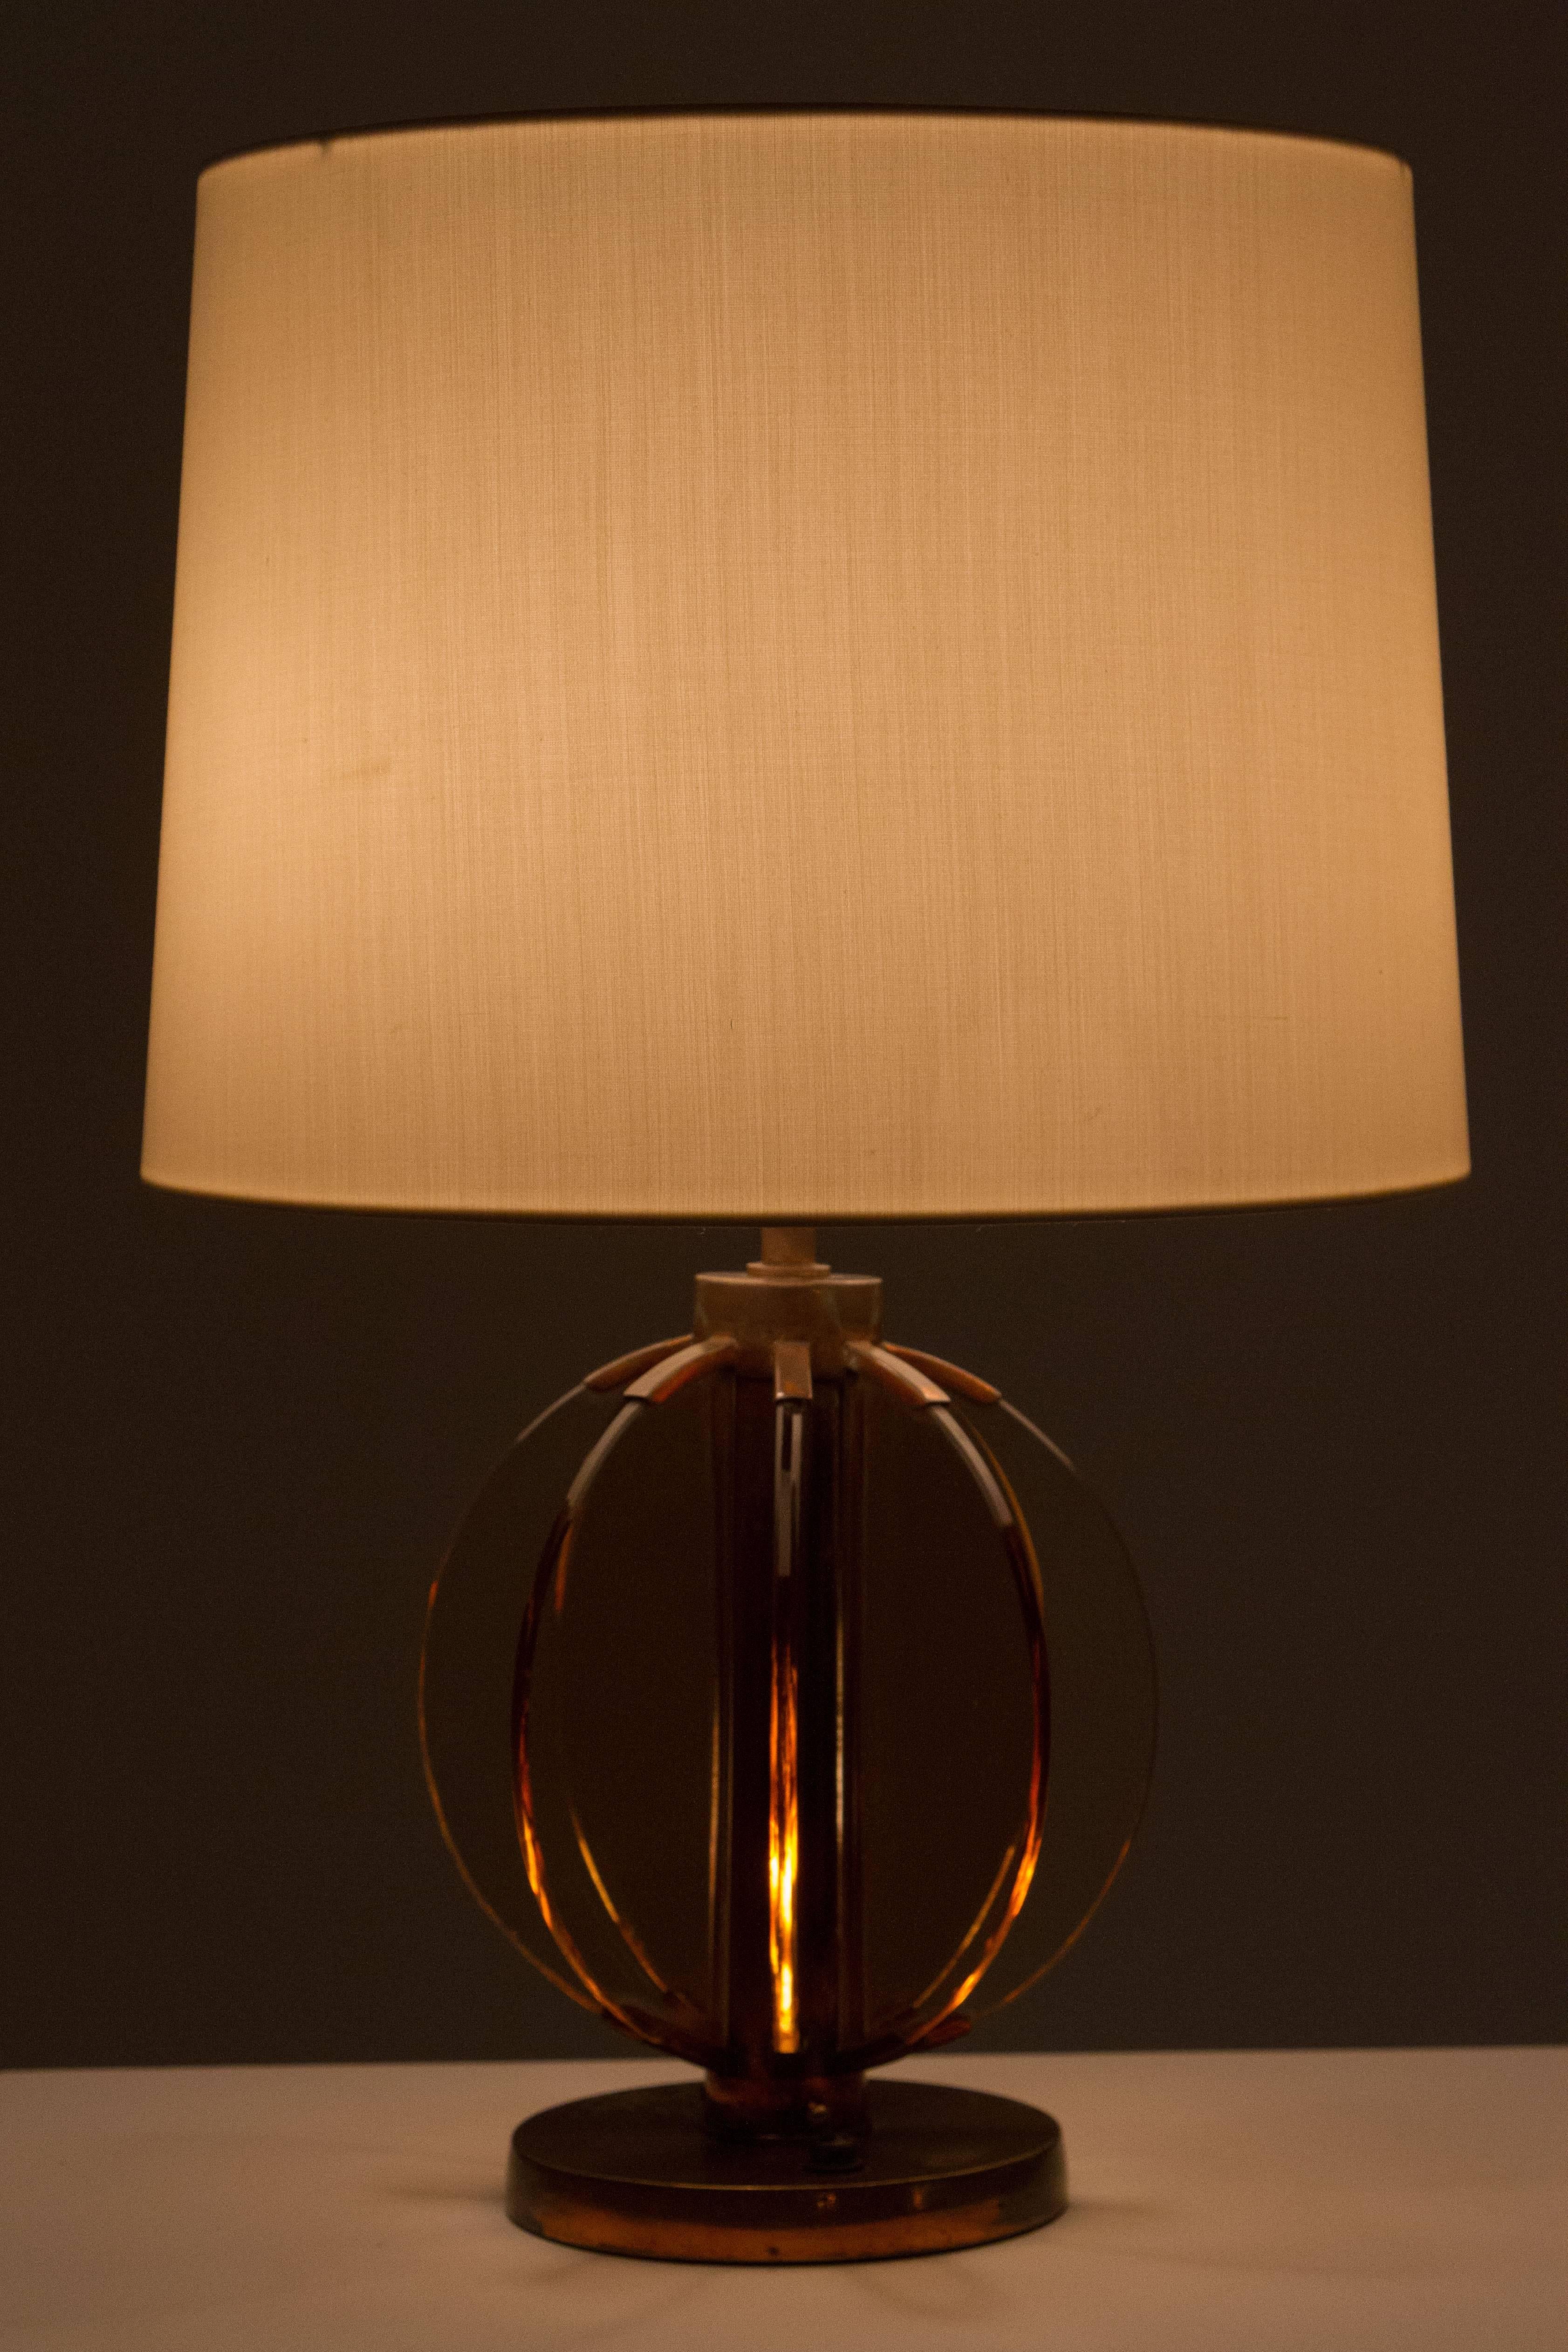 Copper and amber glass table lamp attributed to Fontana Arte. Base illuminates and has separate switch.
Shade not included. 